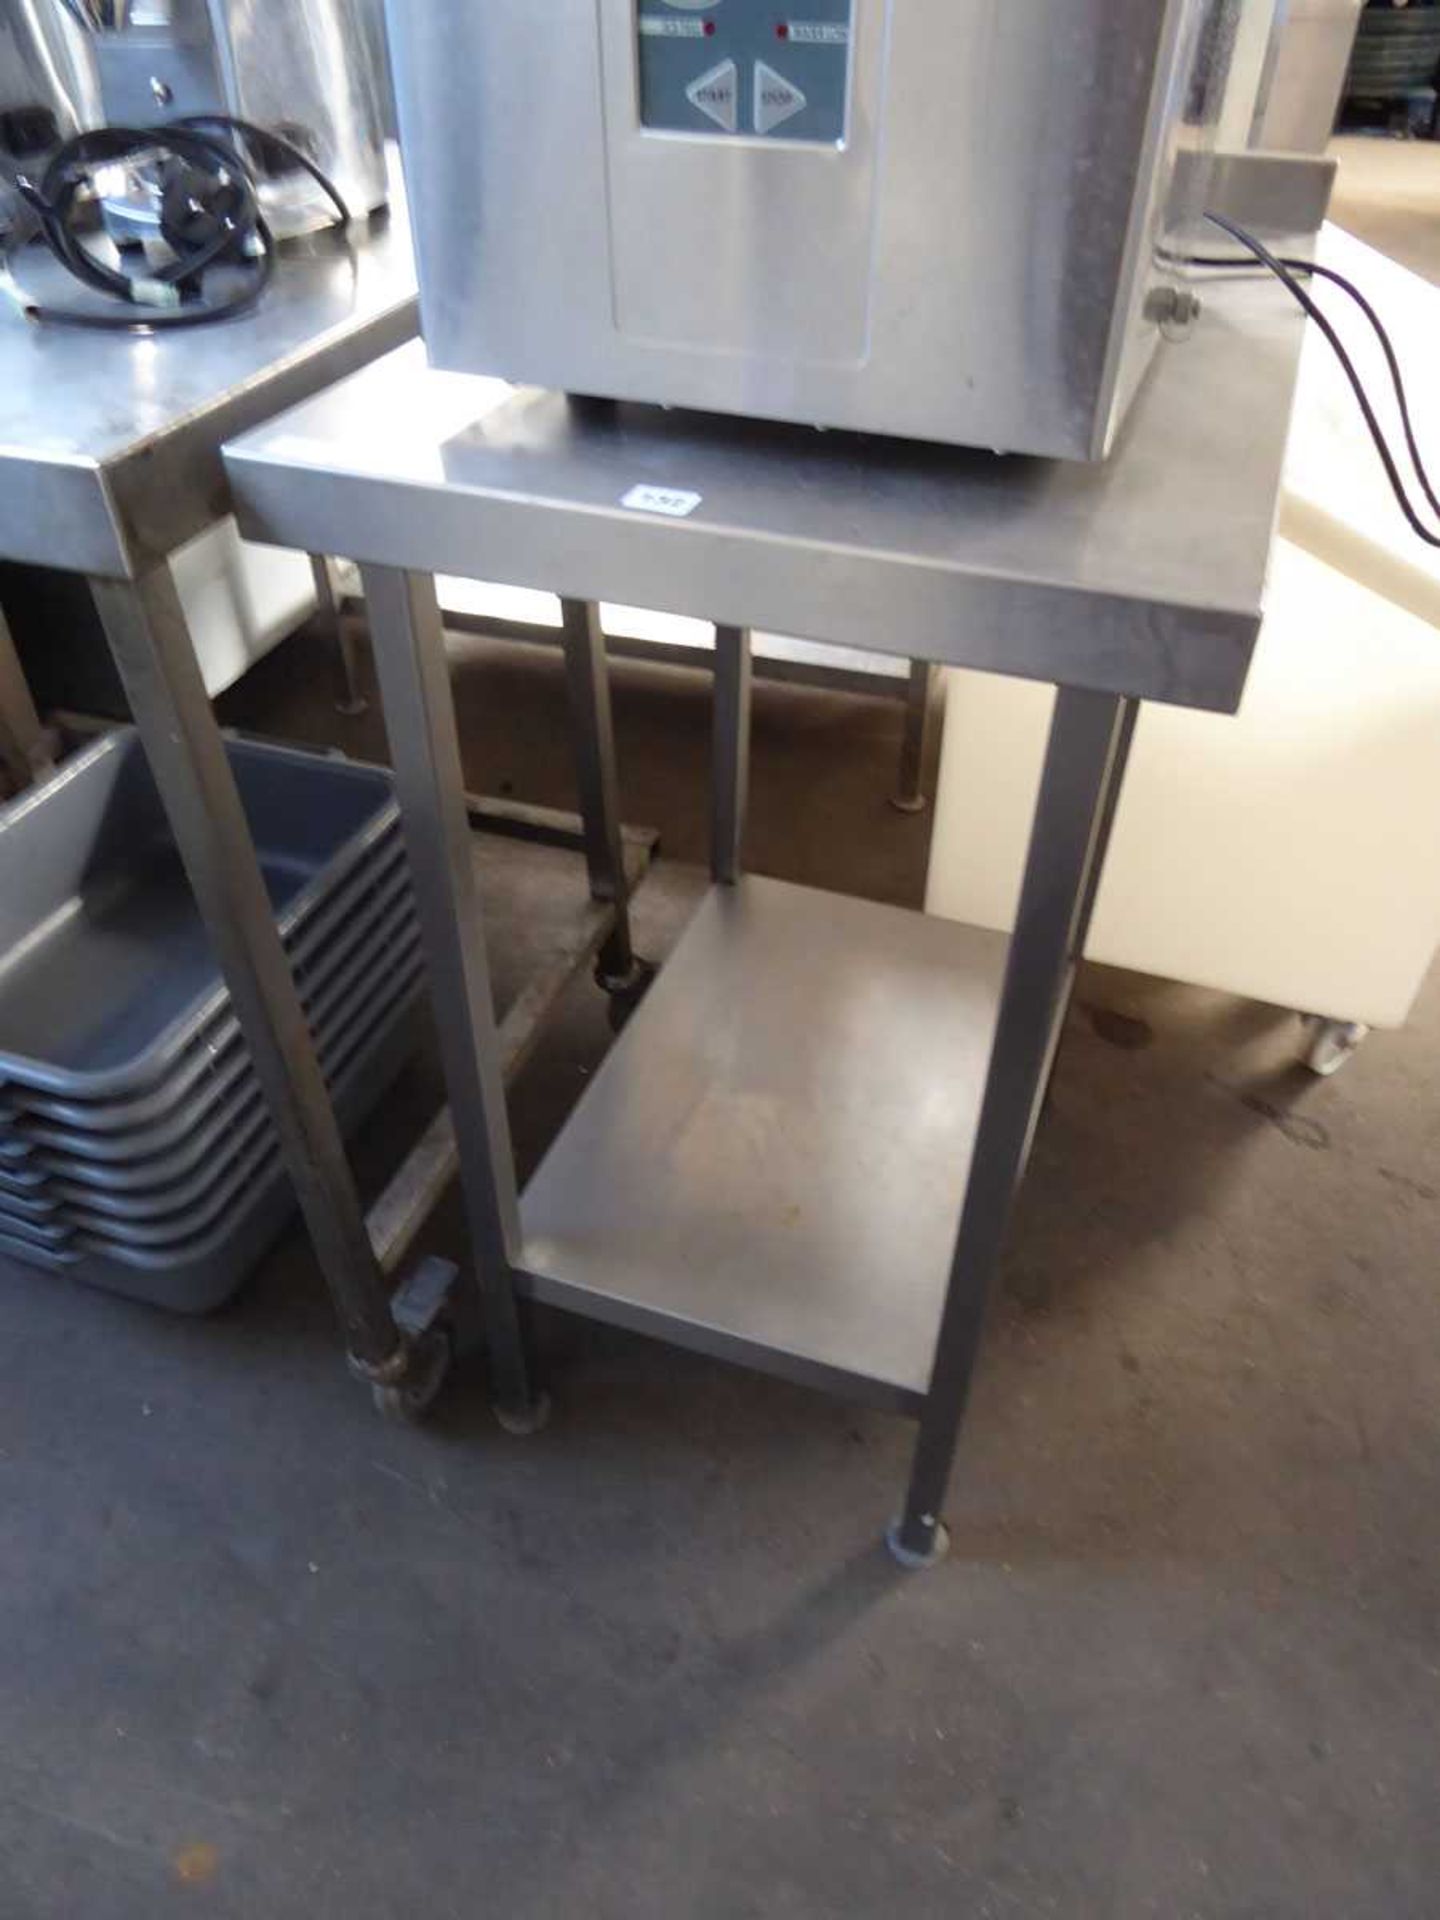 50cm stainless steel preparation table with shelf under - Image 2 of 3